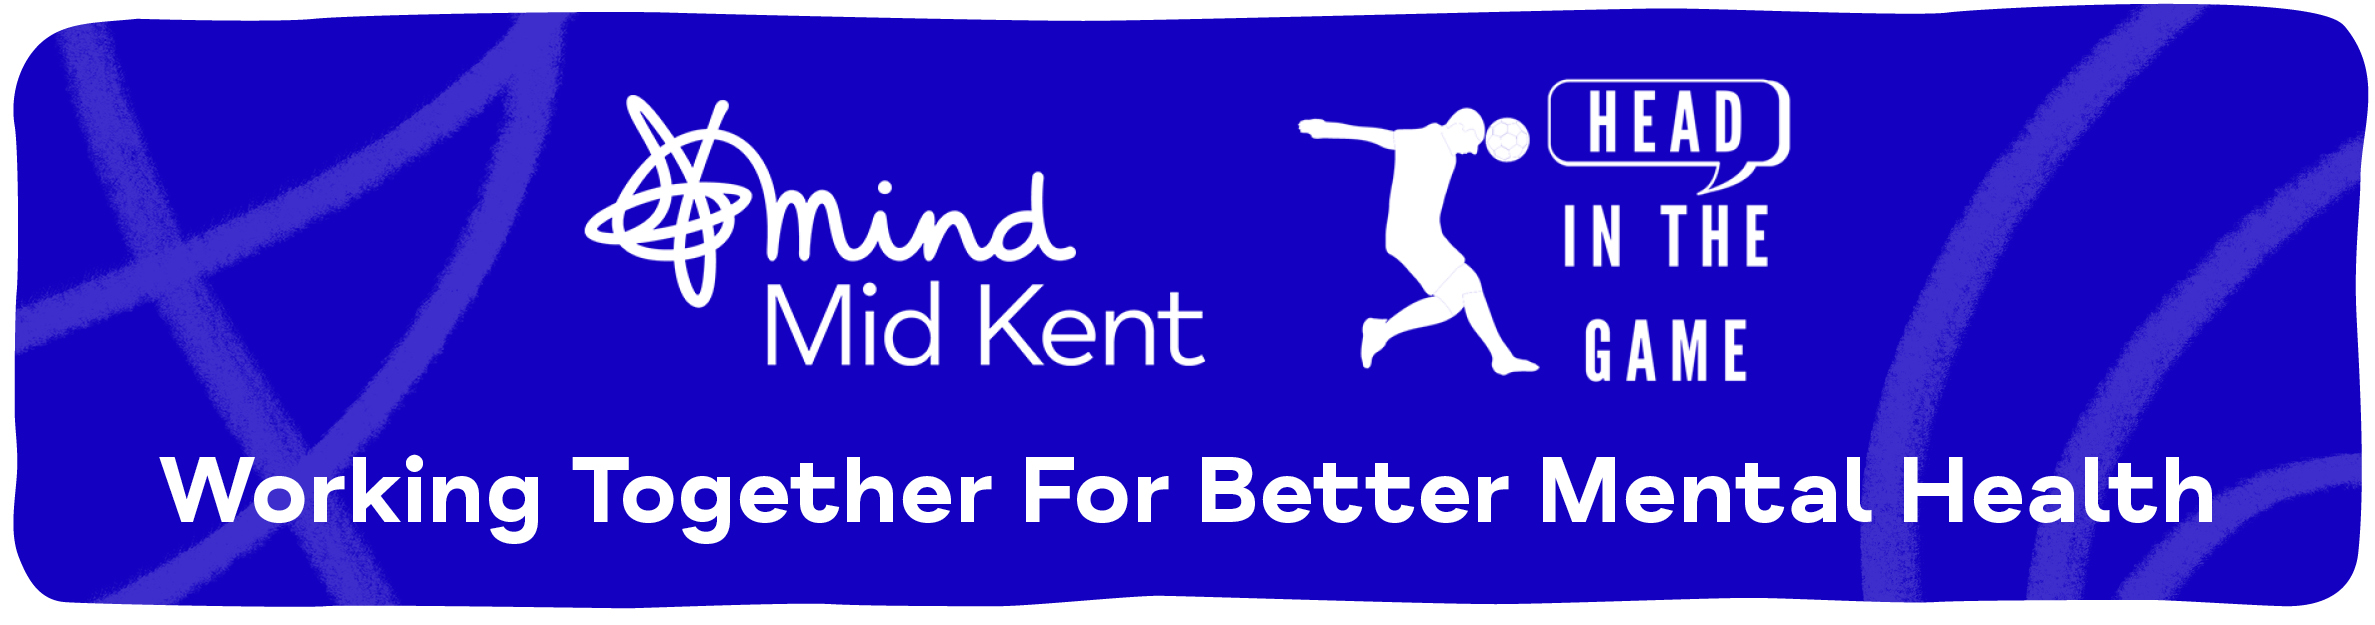 Mid Kent Mind & Head In The Game logos. Working Together For Better Mental Health.